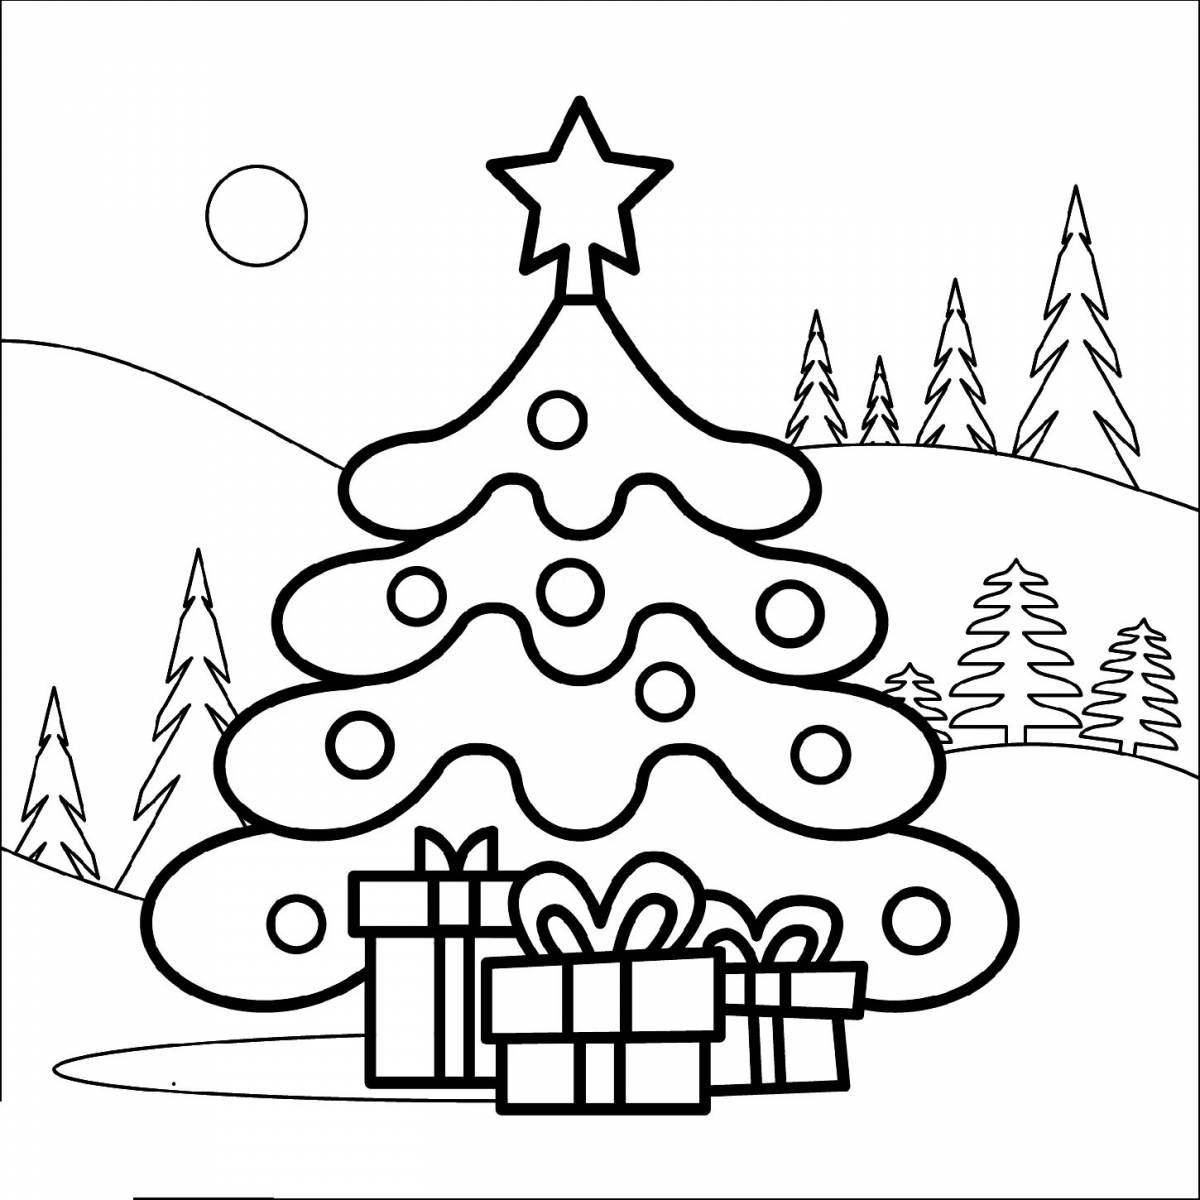 Ornate Christmas tree coloring book